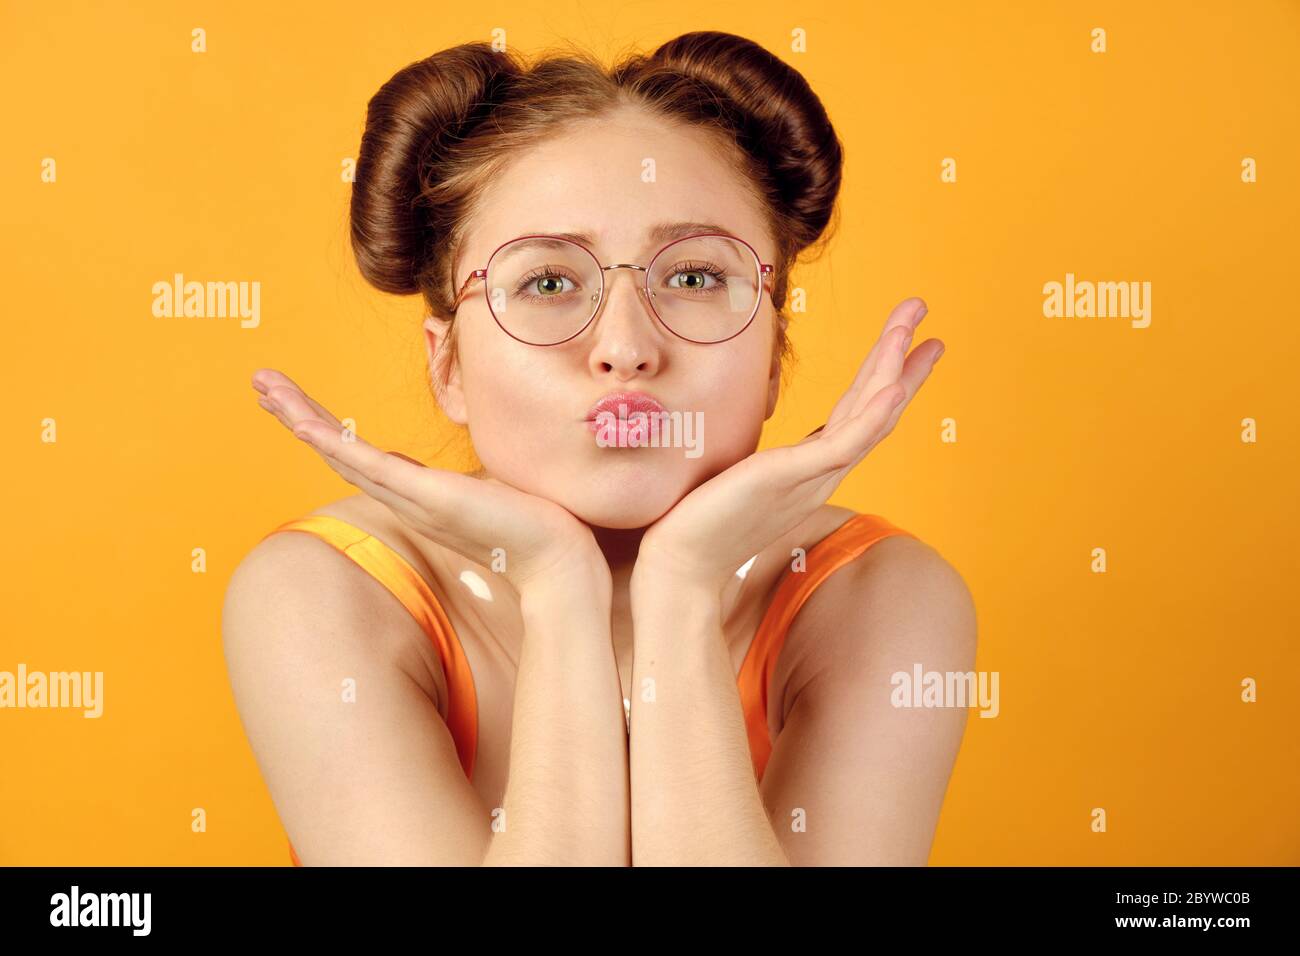 Red-haired girl in round glasses and an orange top is standing on a yellow background, chin resting on palm, lips extended forward Stock Photo